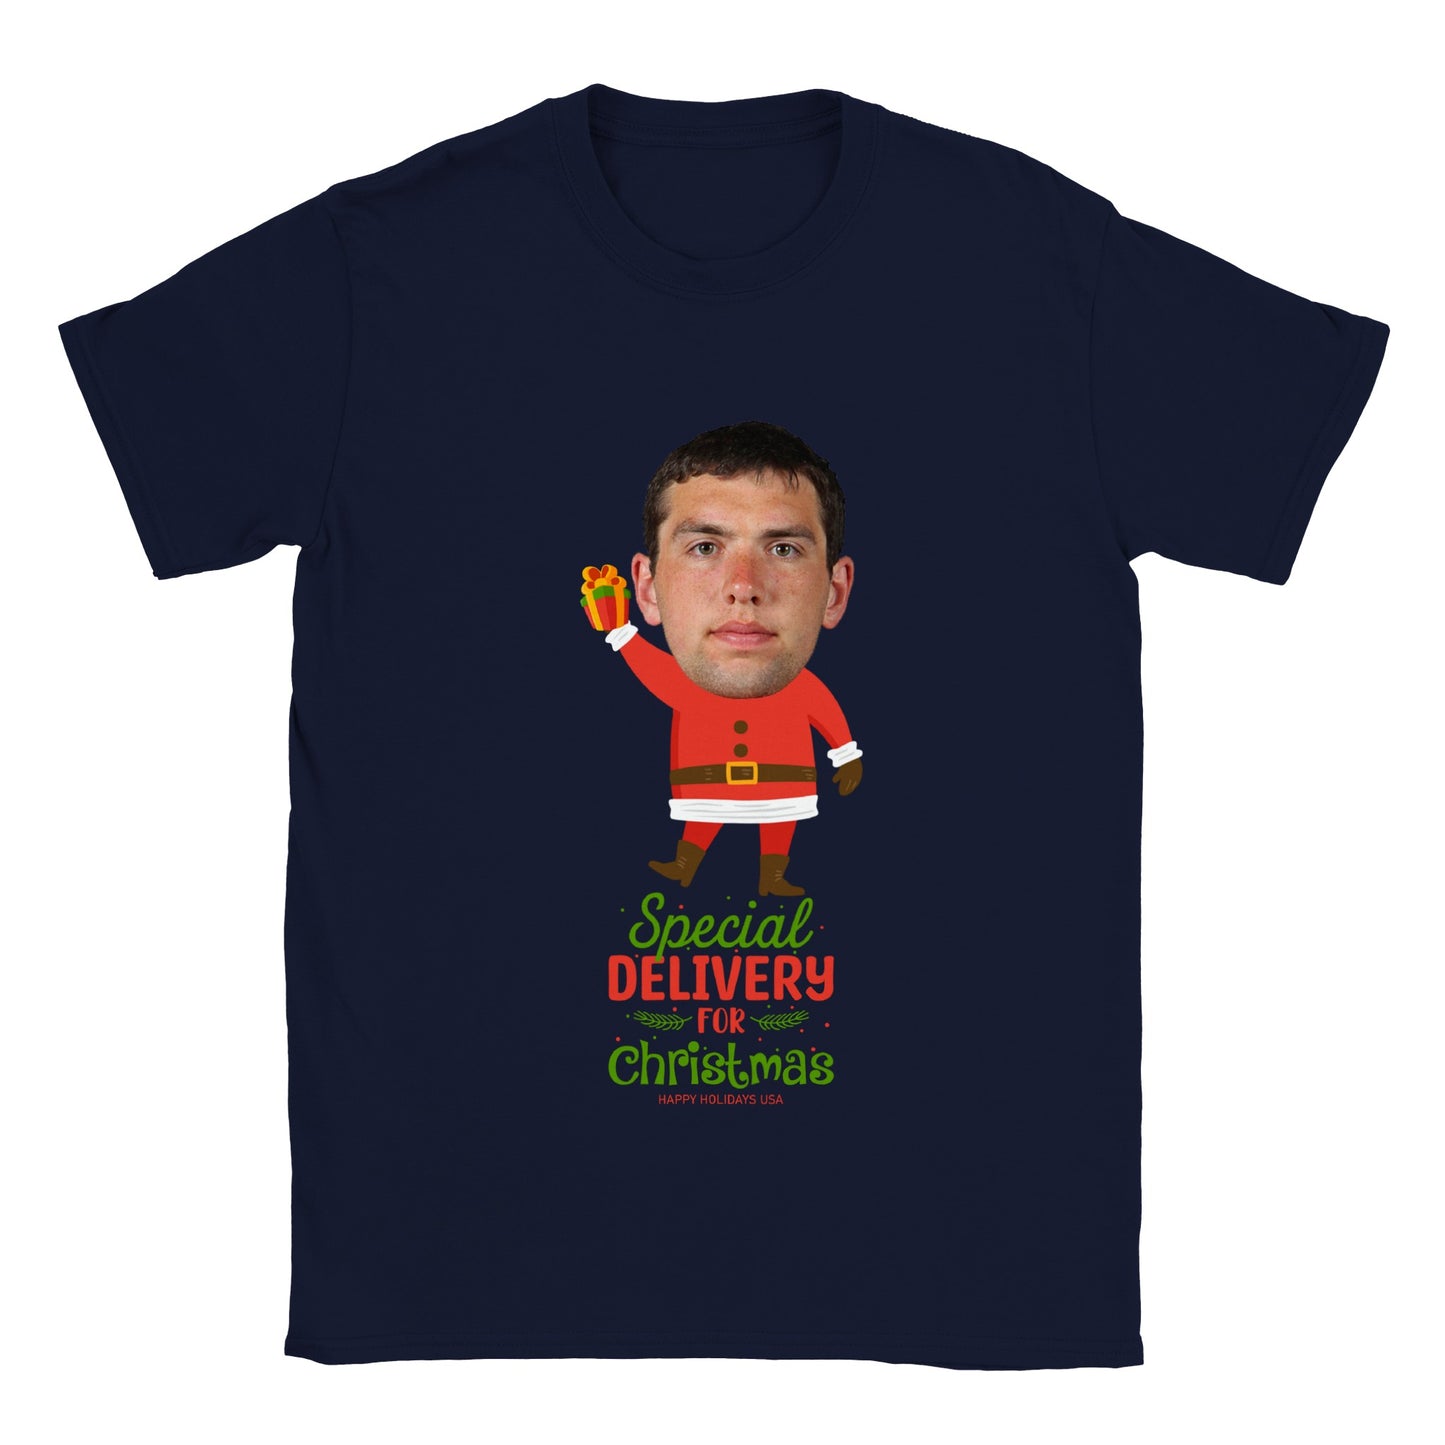 Special Delivery For Christmas - Christmas Tee